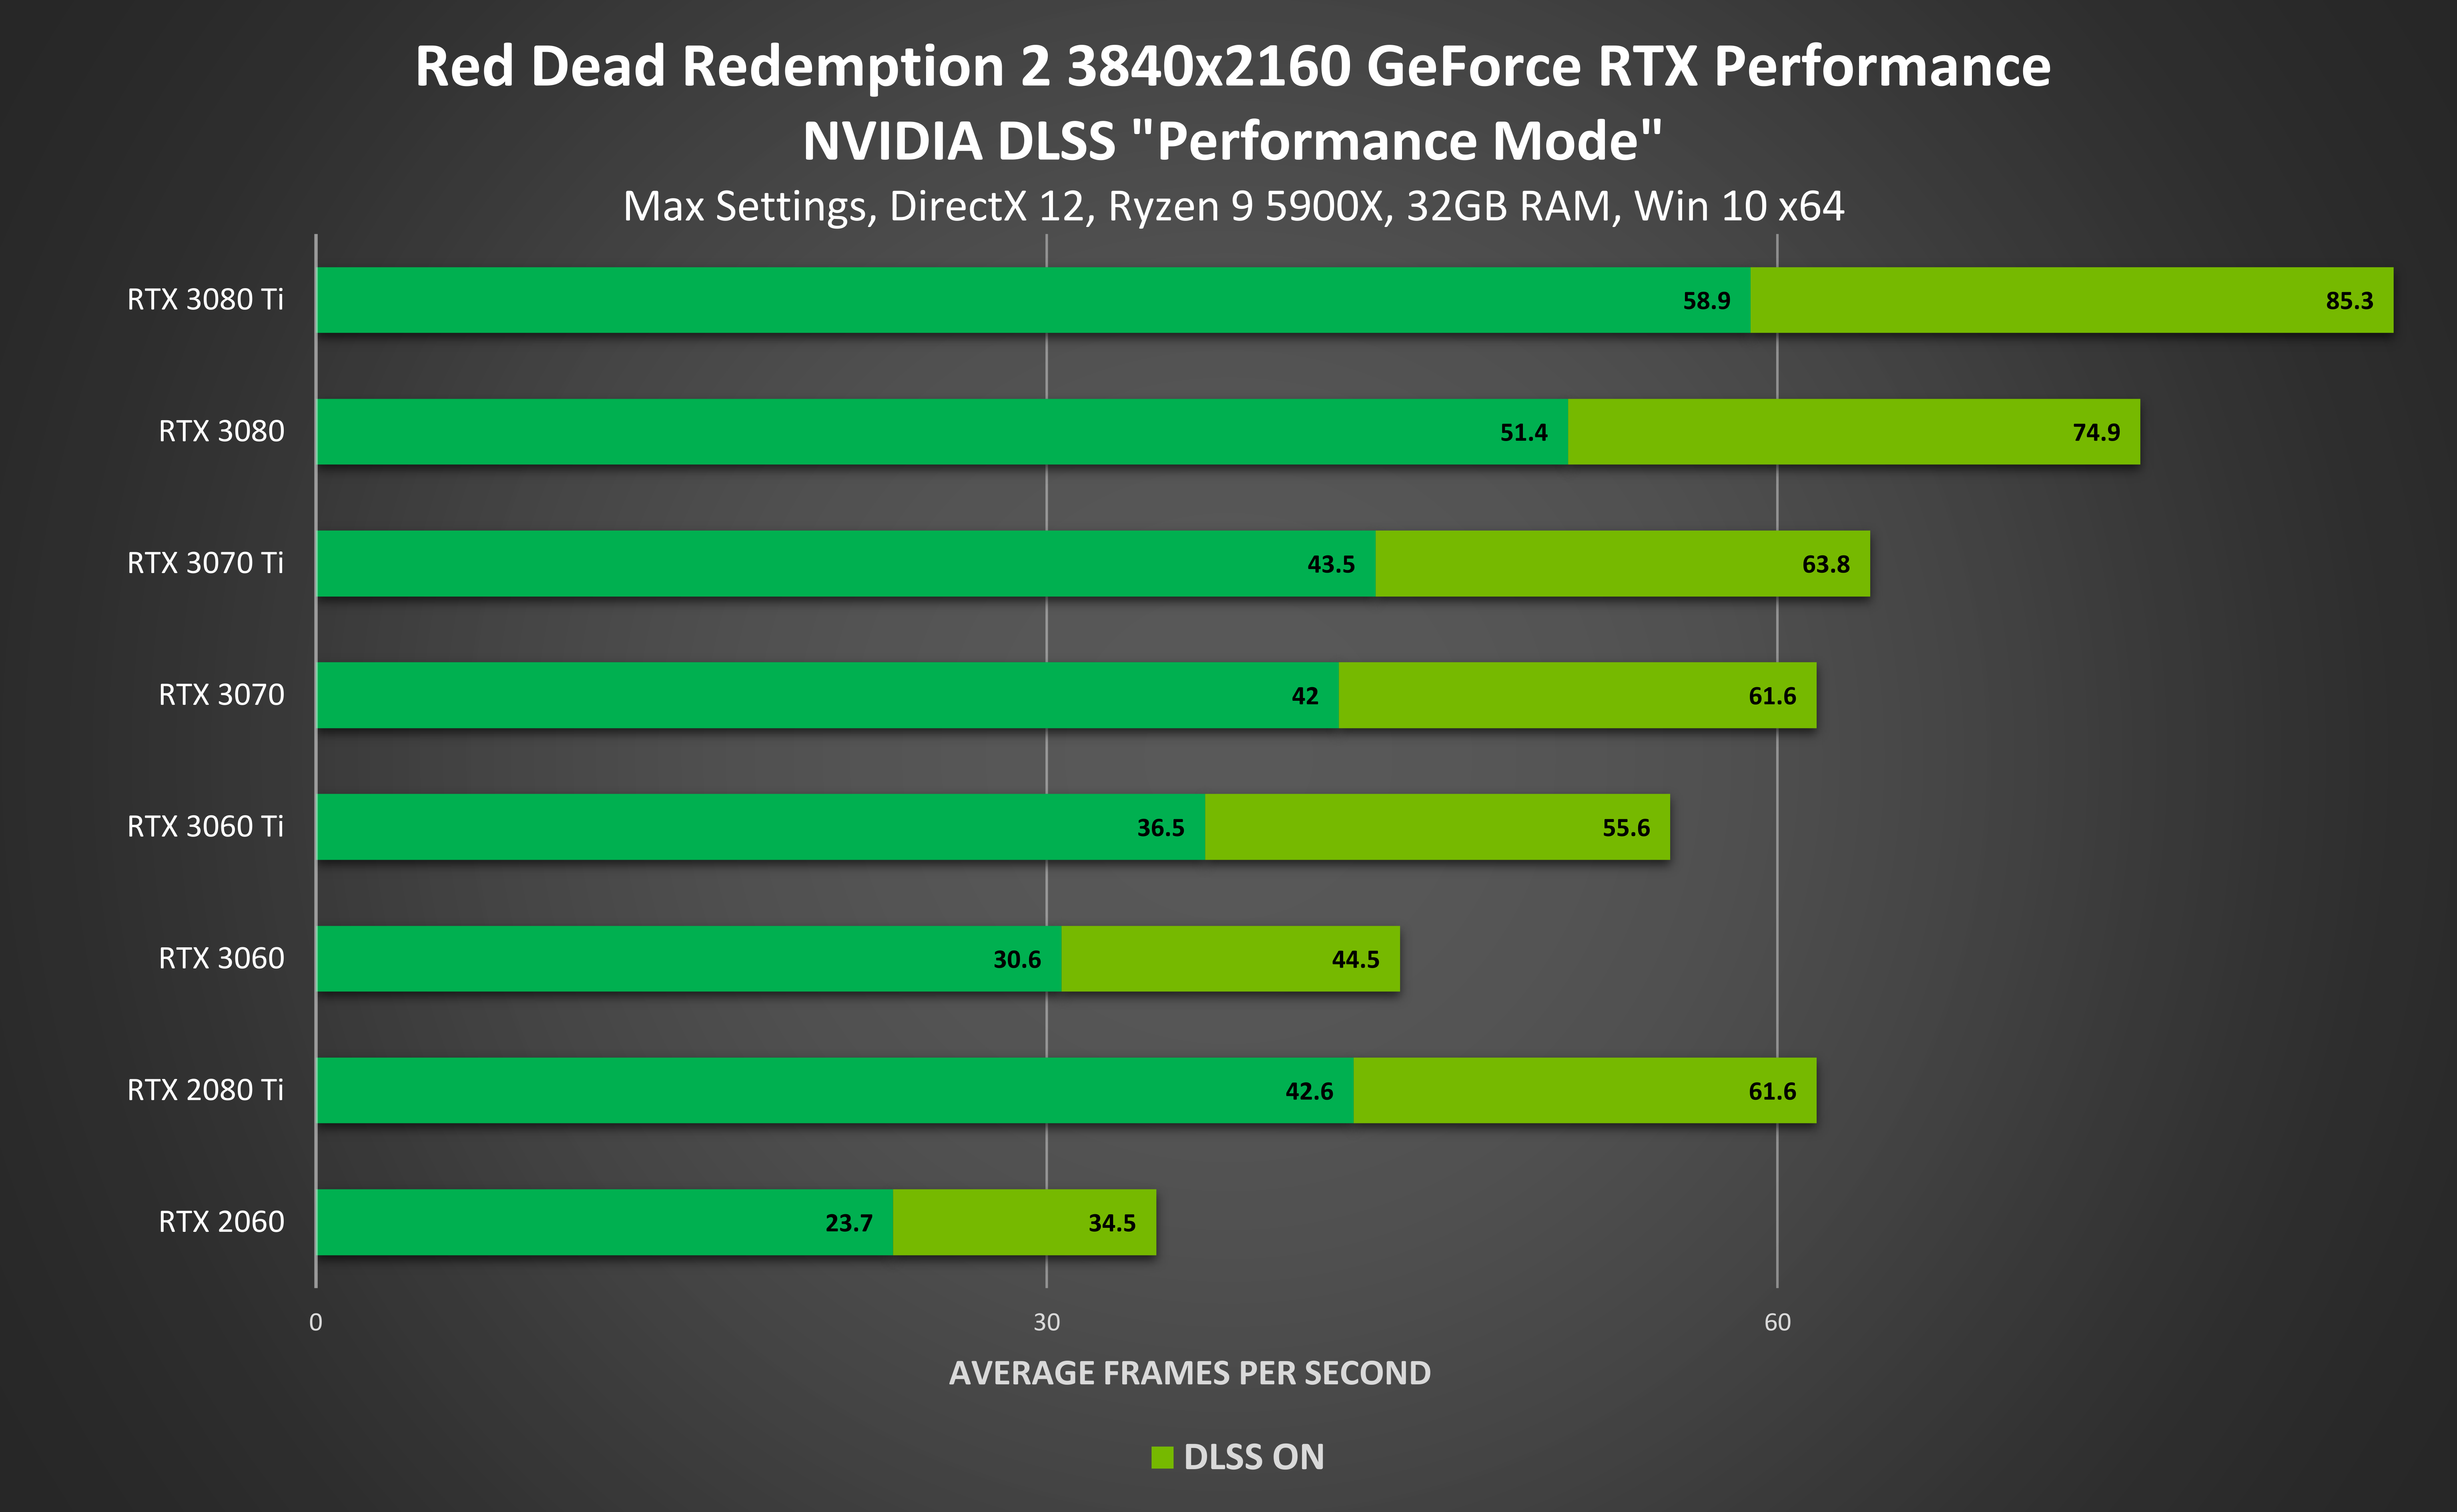 Should you choose Vulkan or DirectX 12 in Red Dead Redemption 2